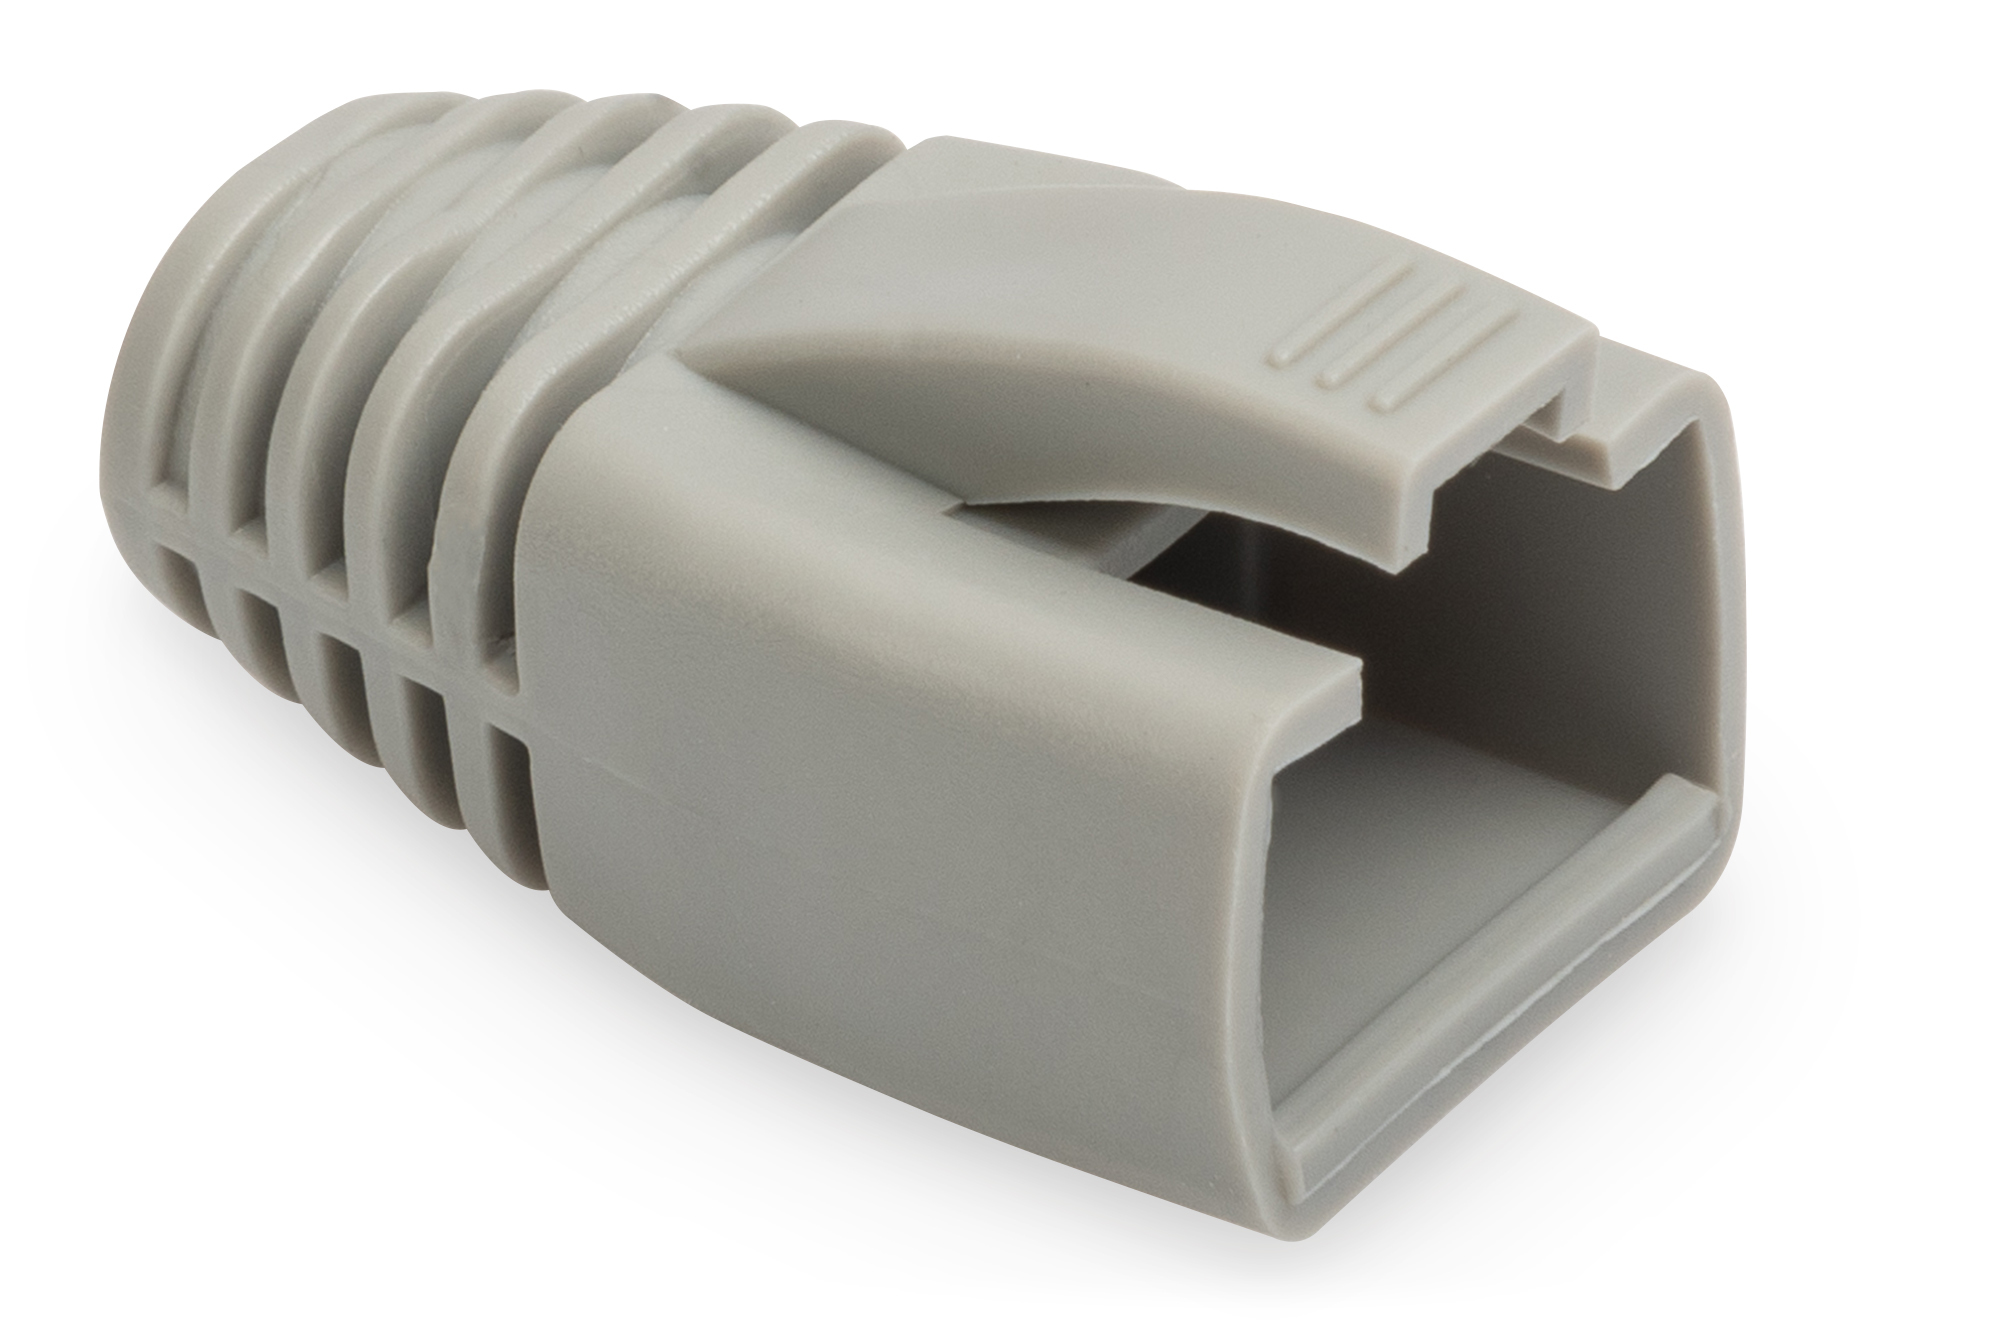 Digitus Kink Protection Sleeves, for 8P8C modular plugs solid cable with AWG 23, Color grey